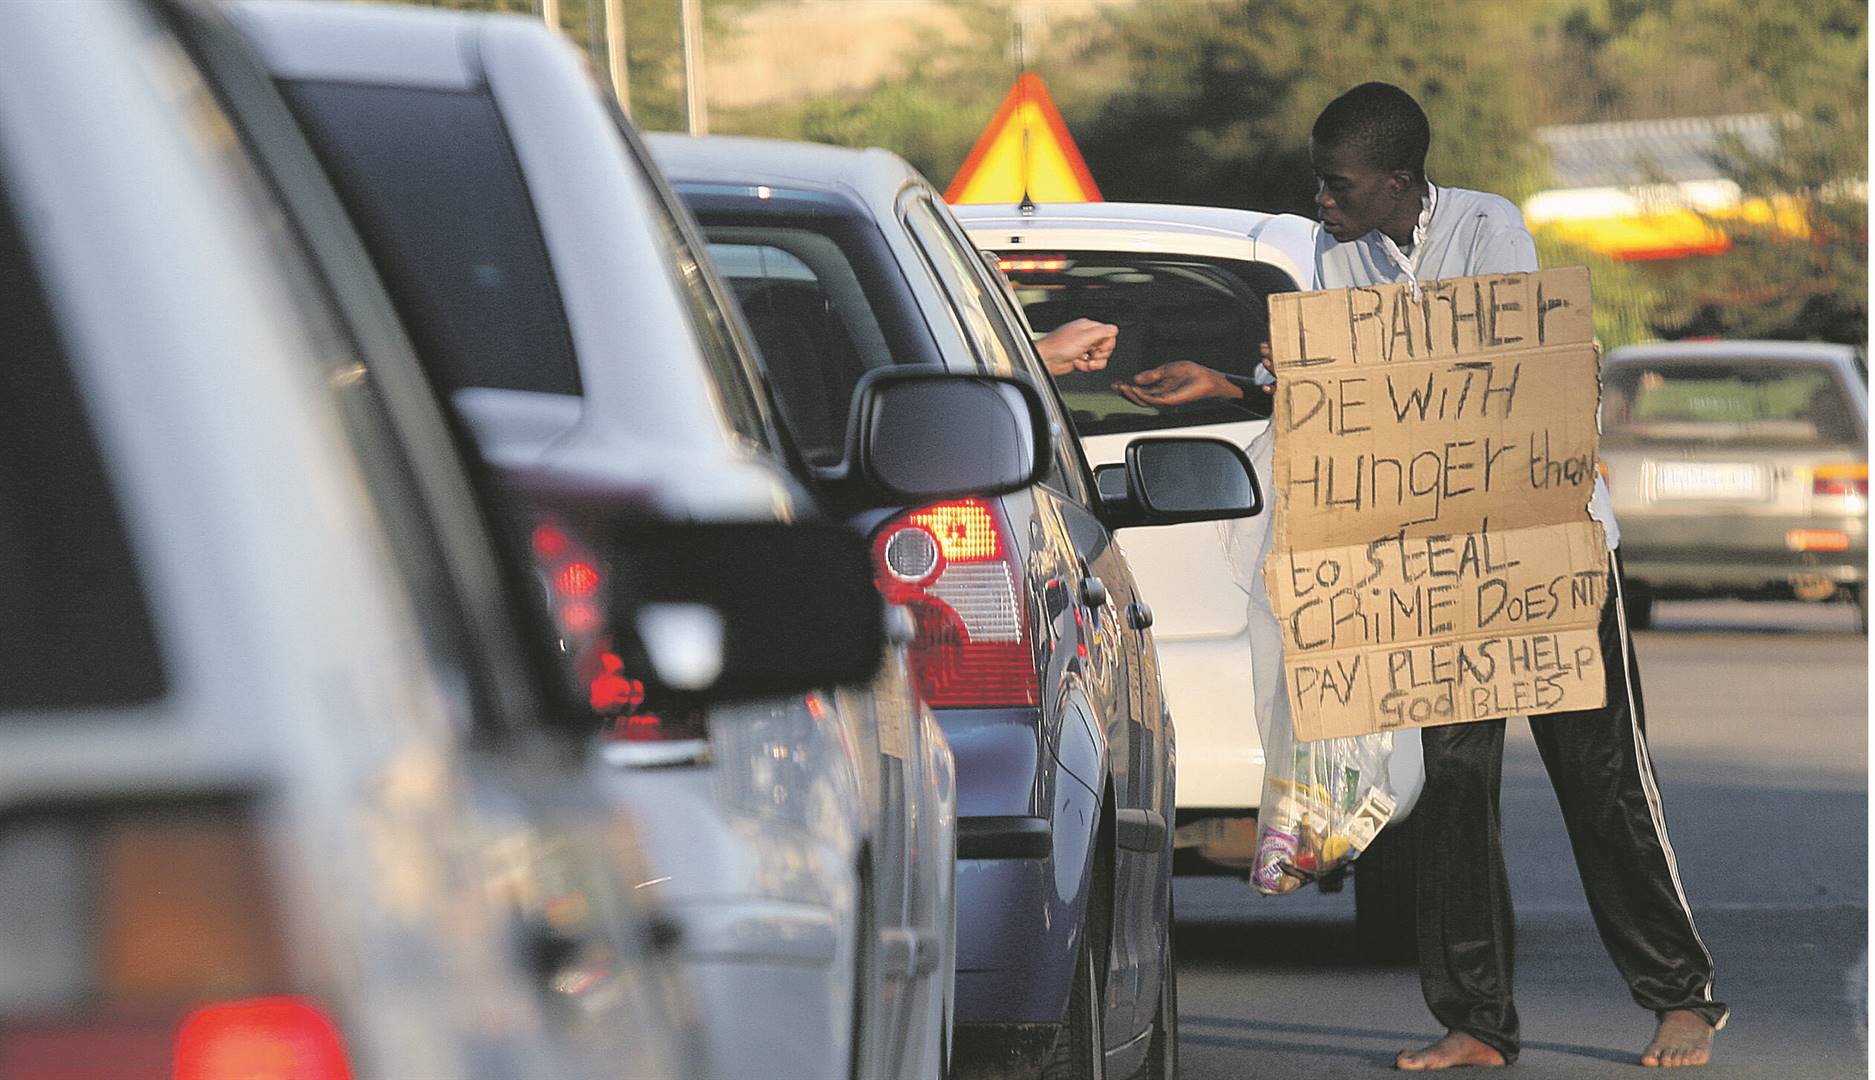 Without new strategies to improve domestic economic conditions, economic growth and job creation, South Africans face a bleak 2022, writes the author. Photo: Khaya Ngwenya